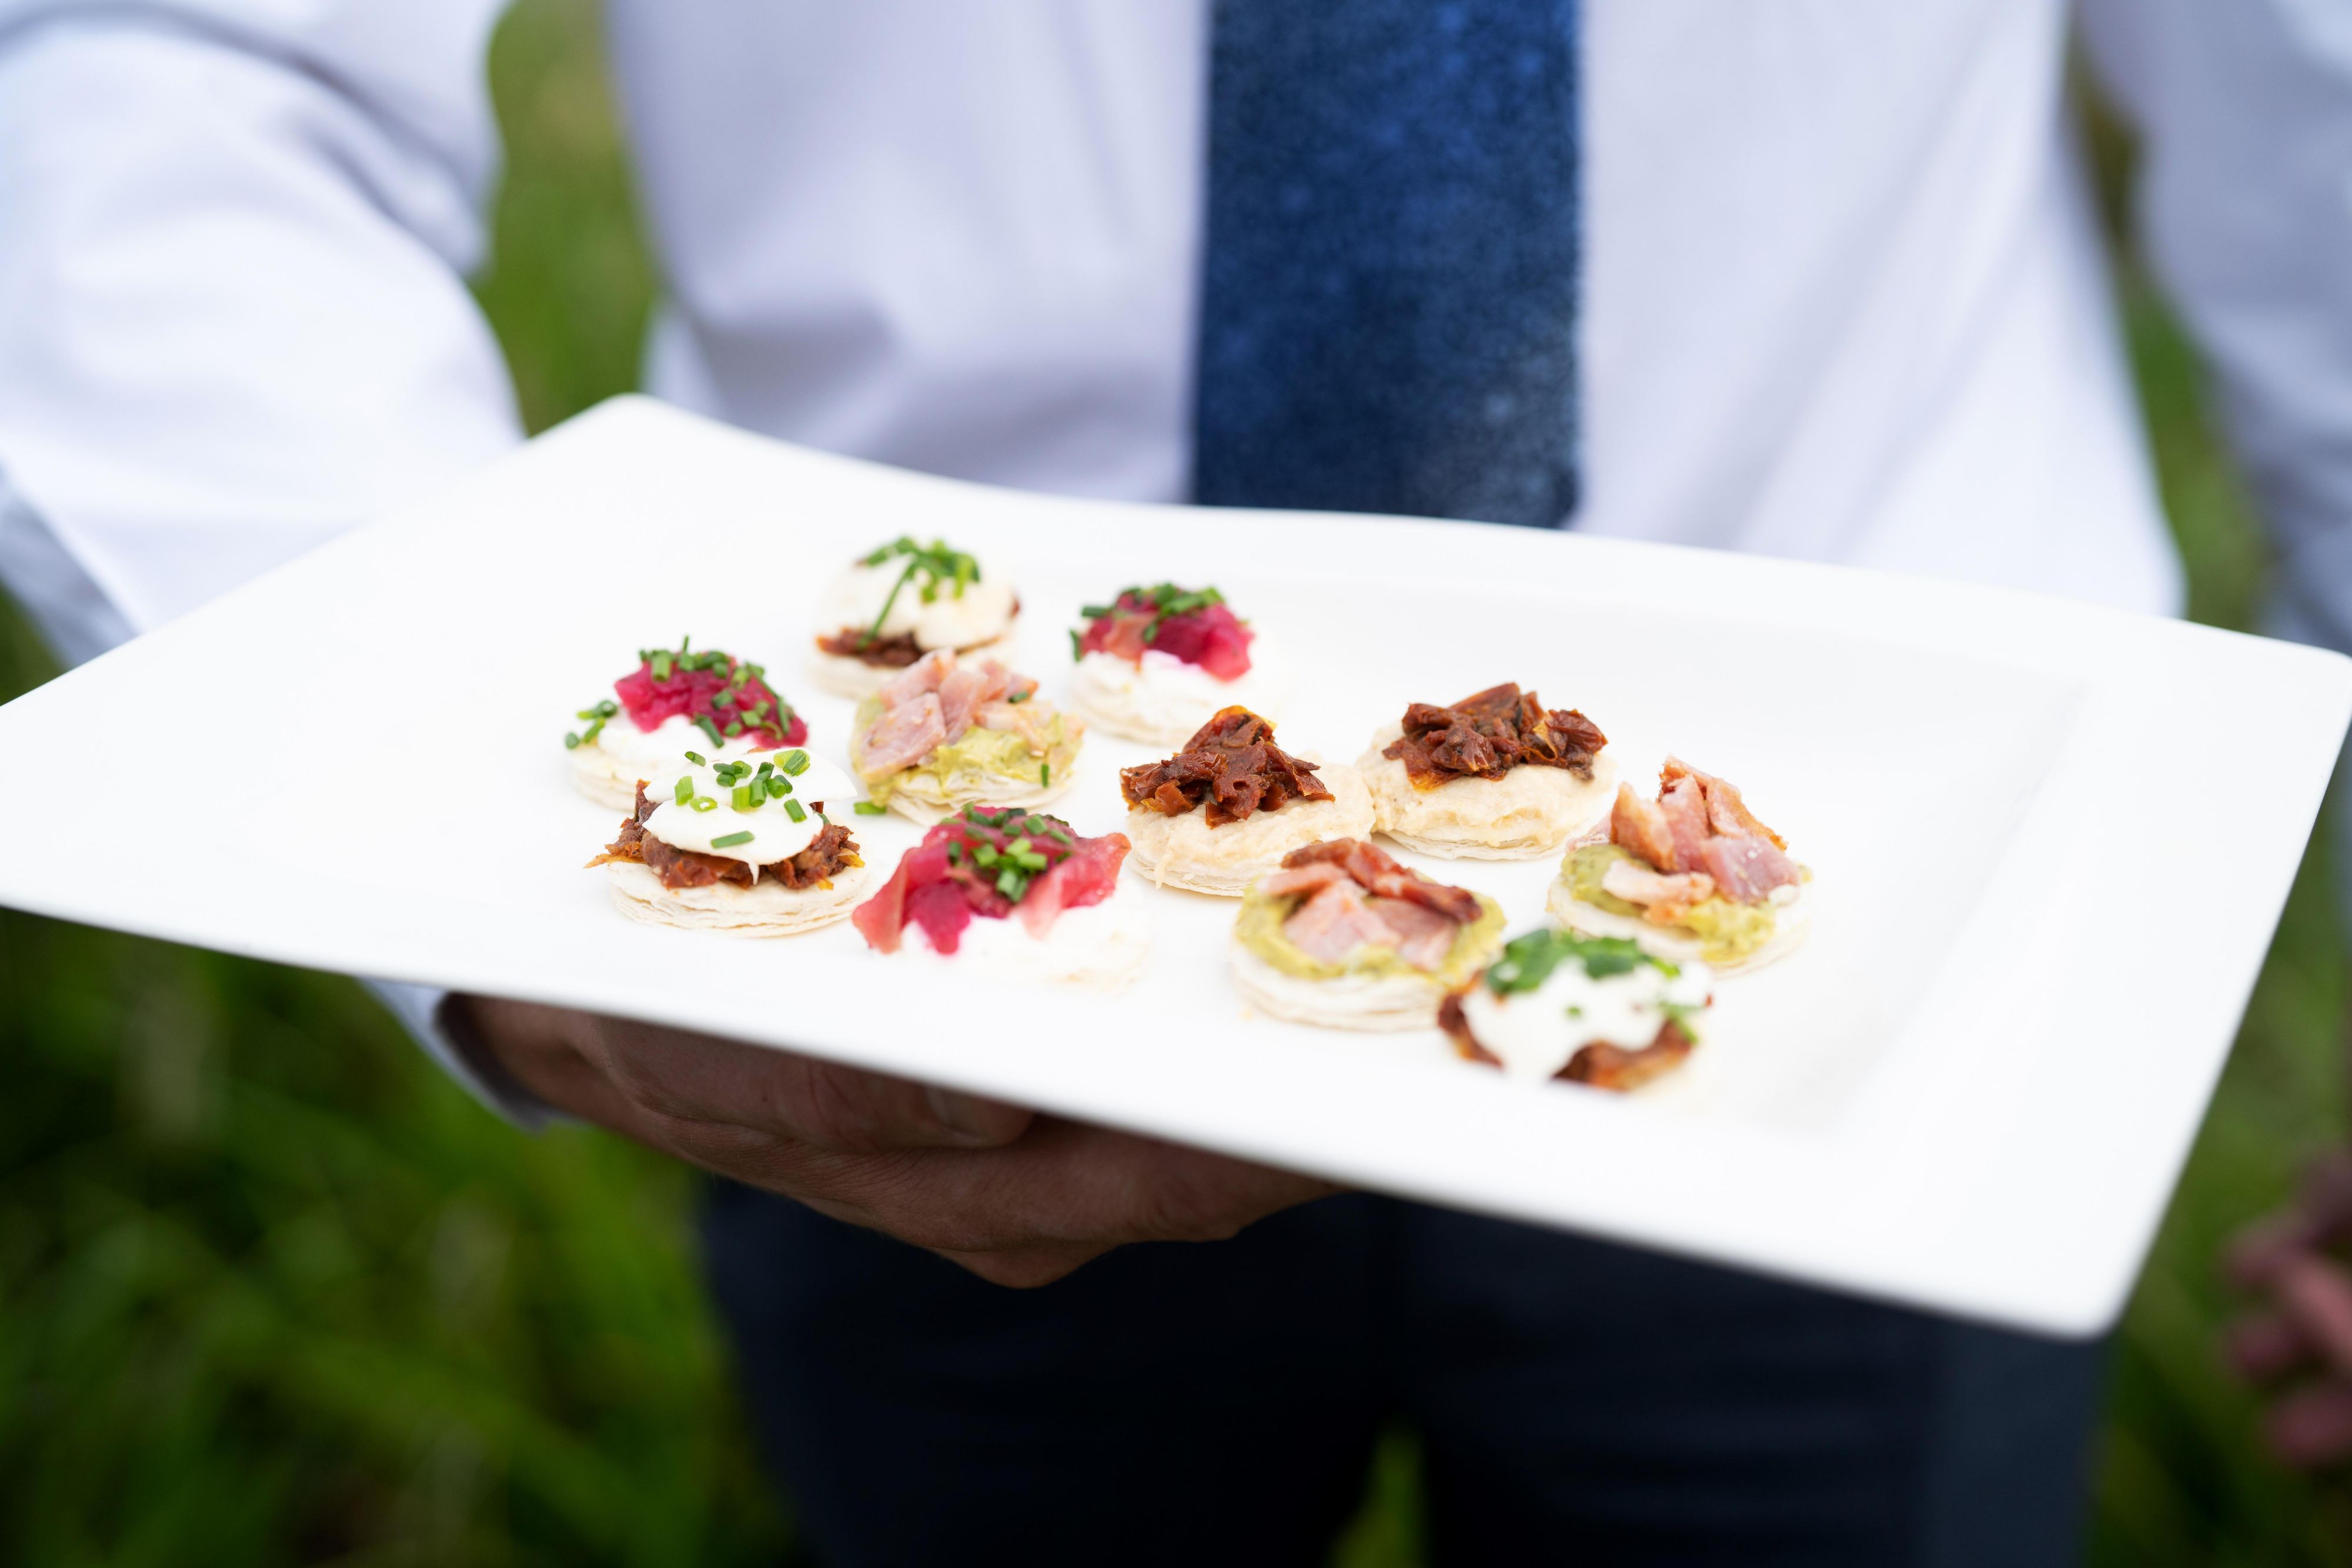 Canapes served at a wedding reception